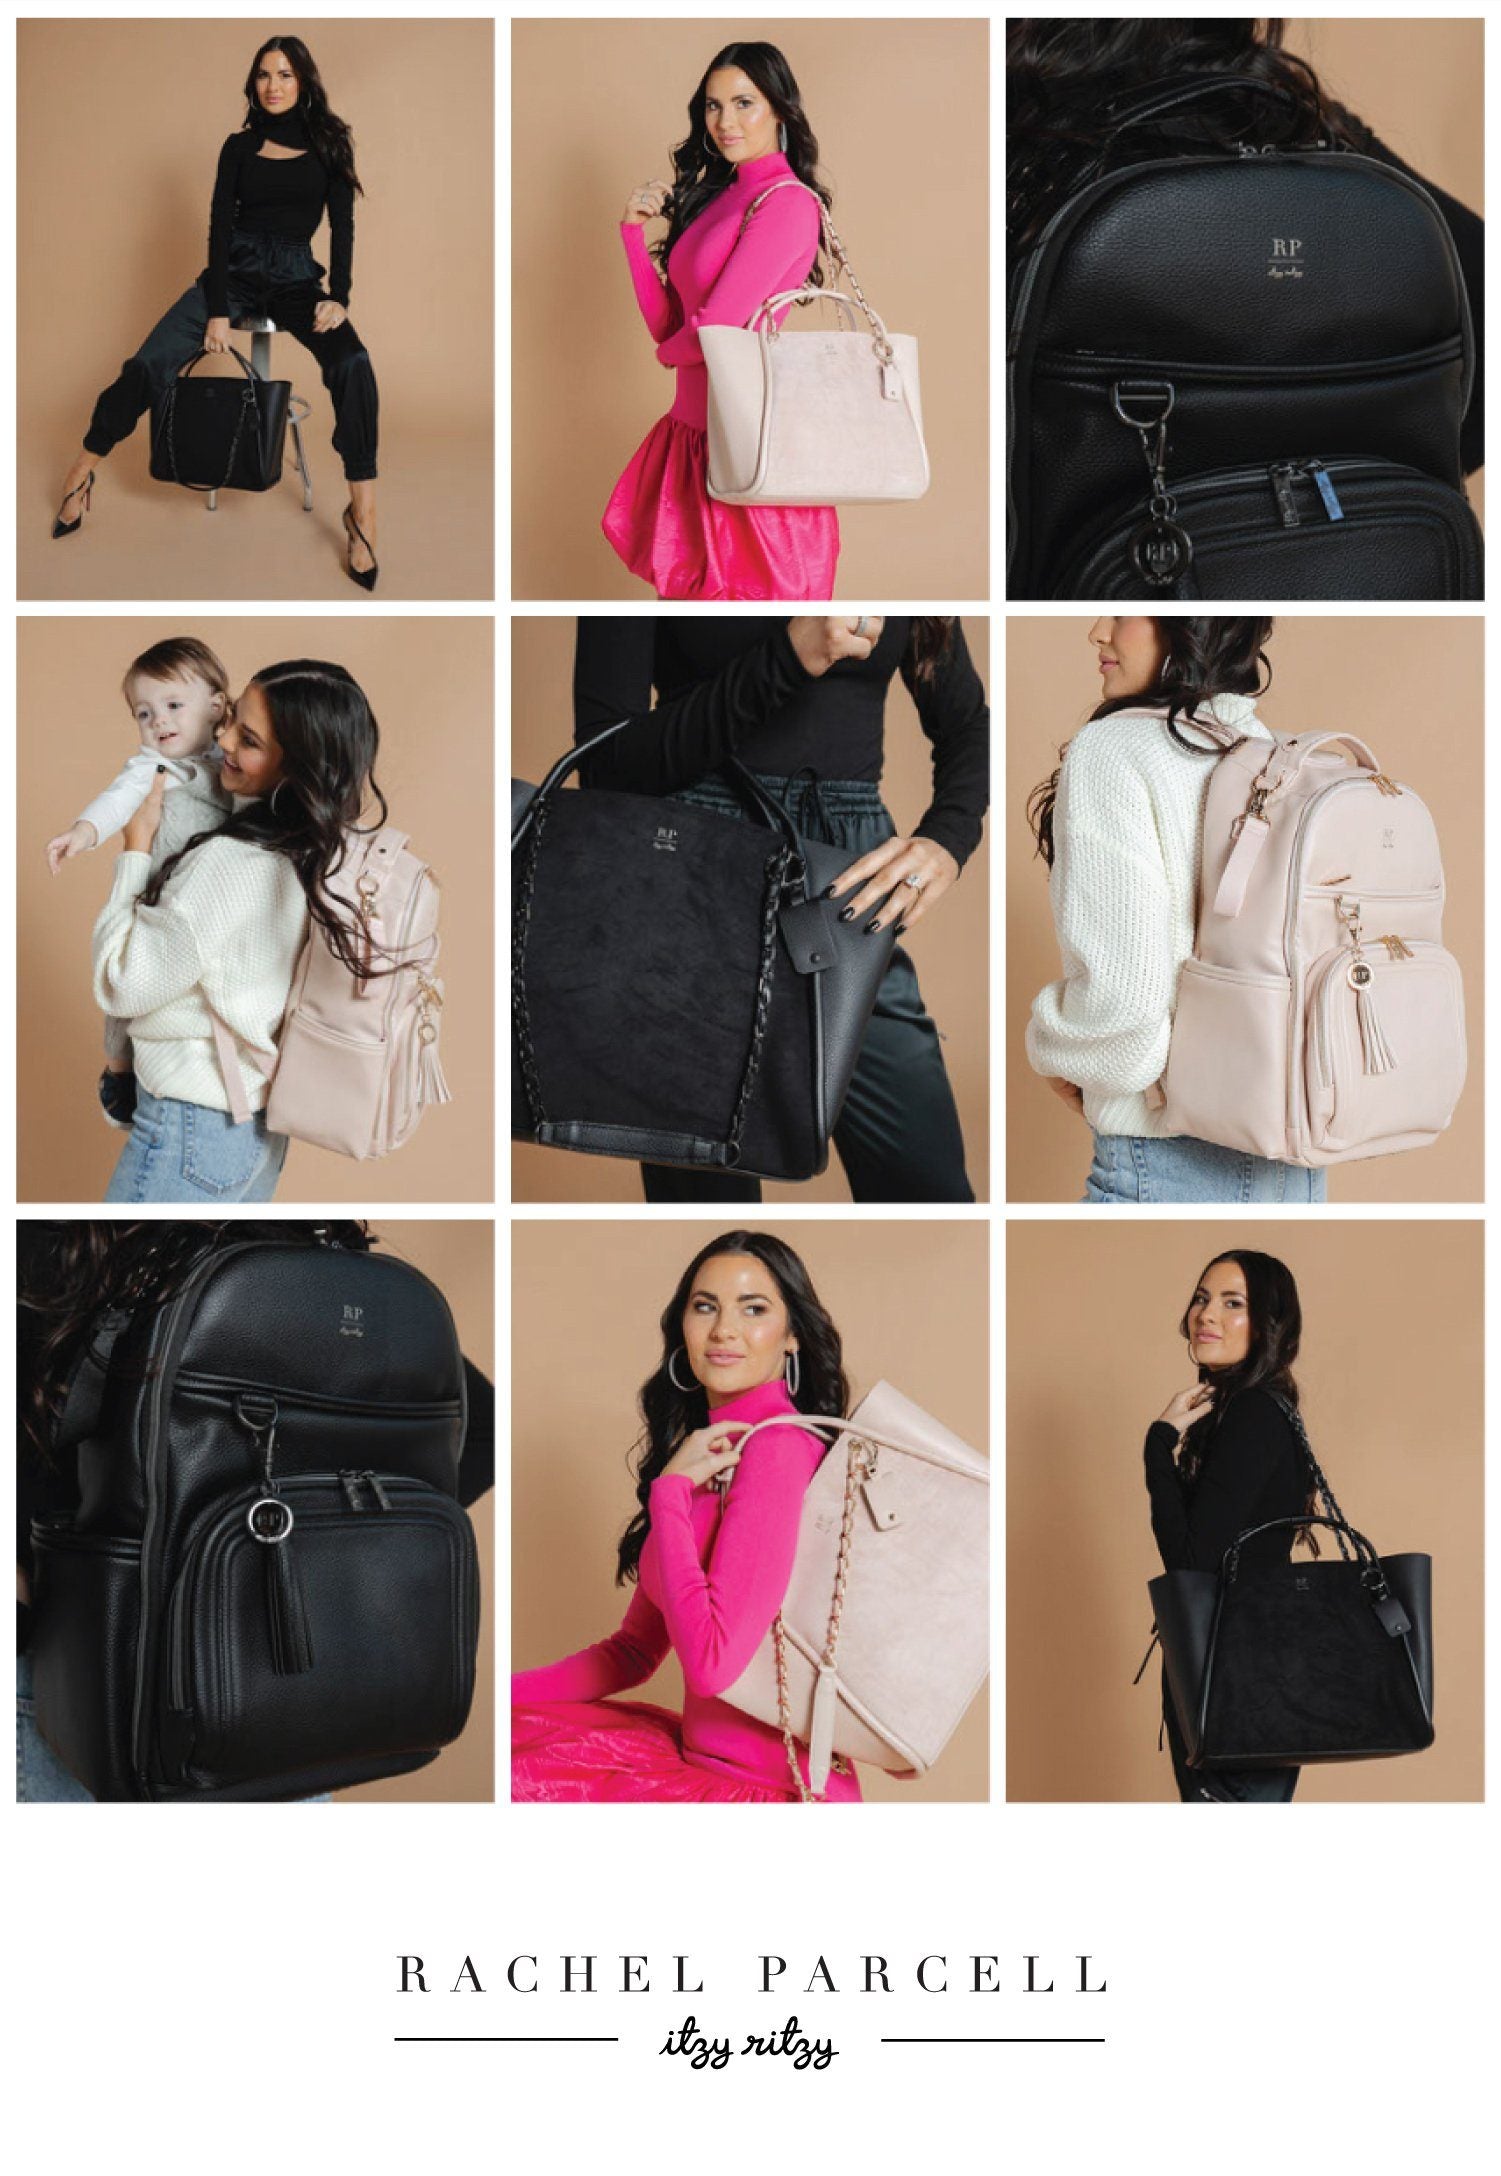 Designer Diaper Bags: A Mommy Bag For Hospital Visits Doesn't Need To Look  Bland - Luli Bebé - Medium